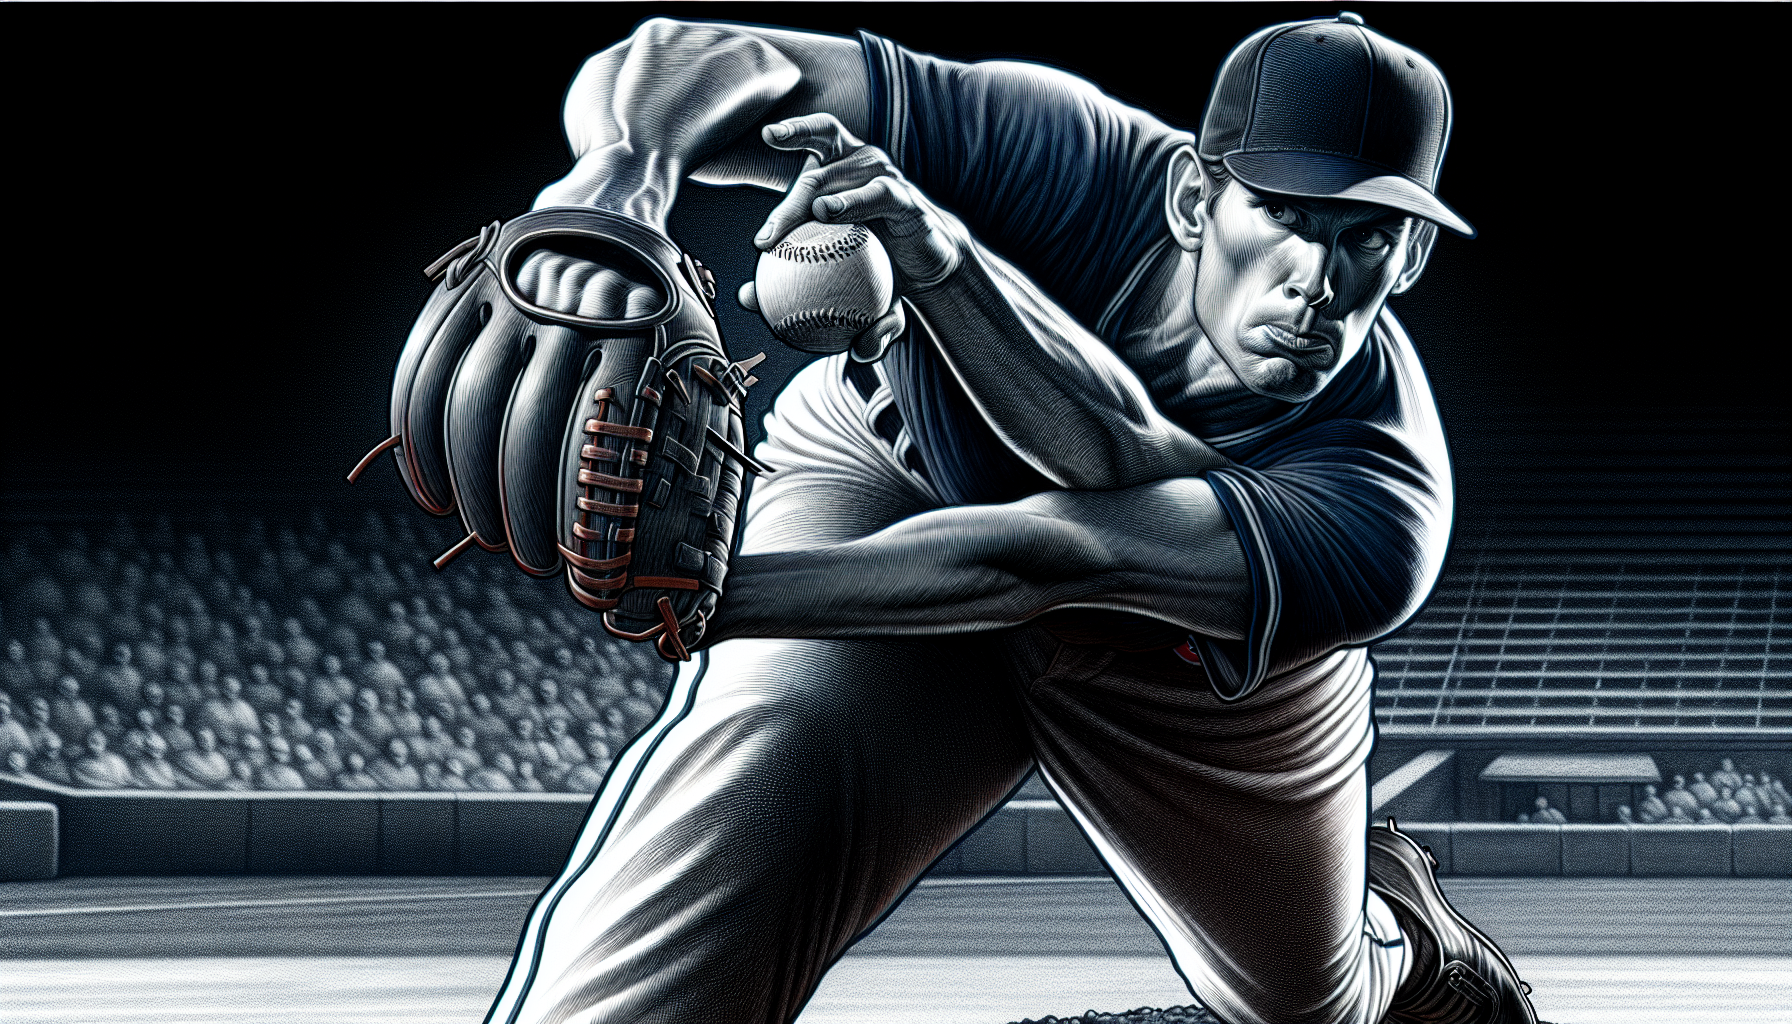 Illustration of a baseball pitcher in action